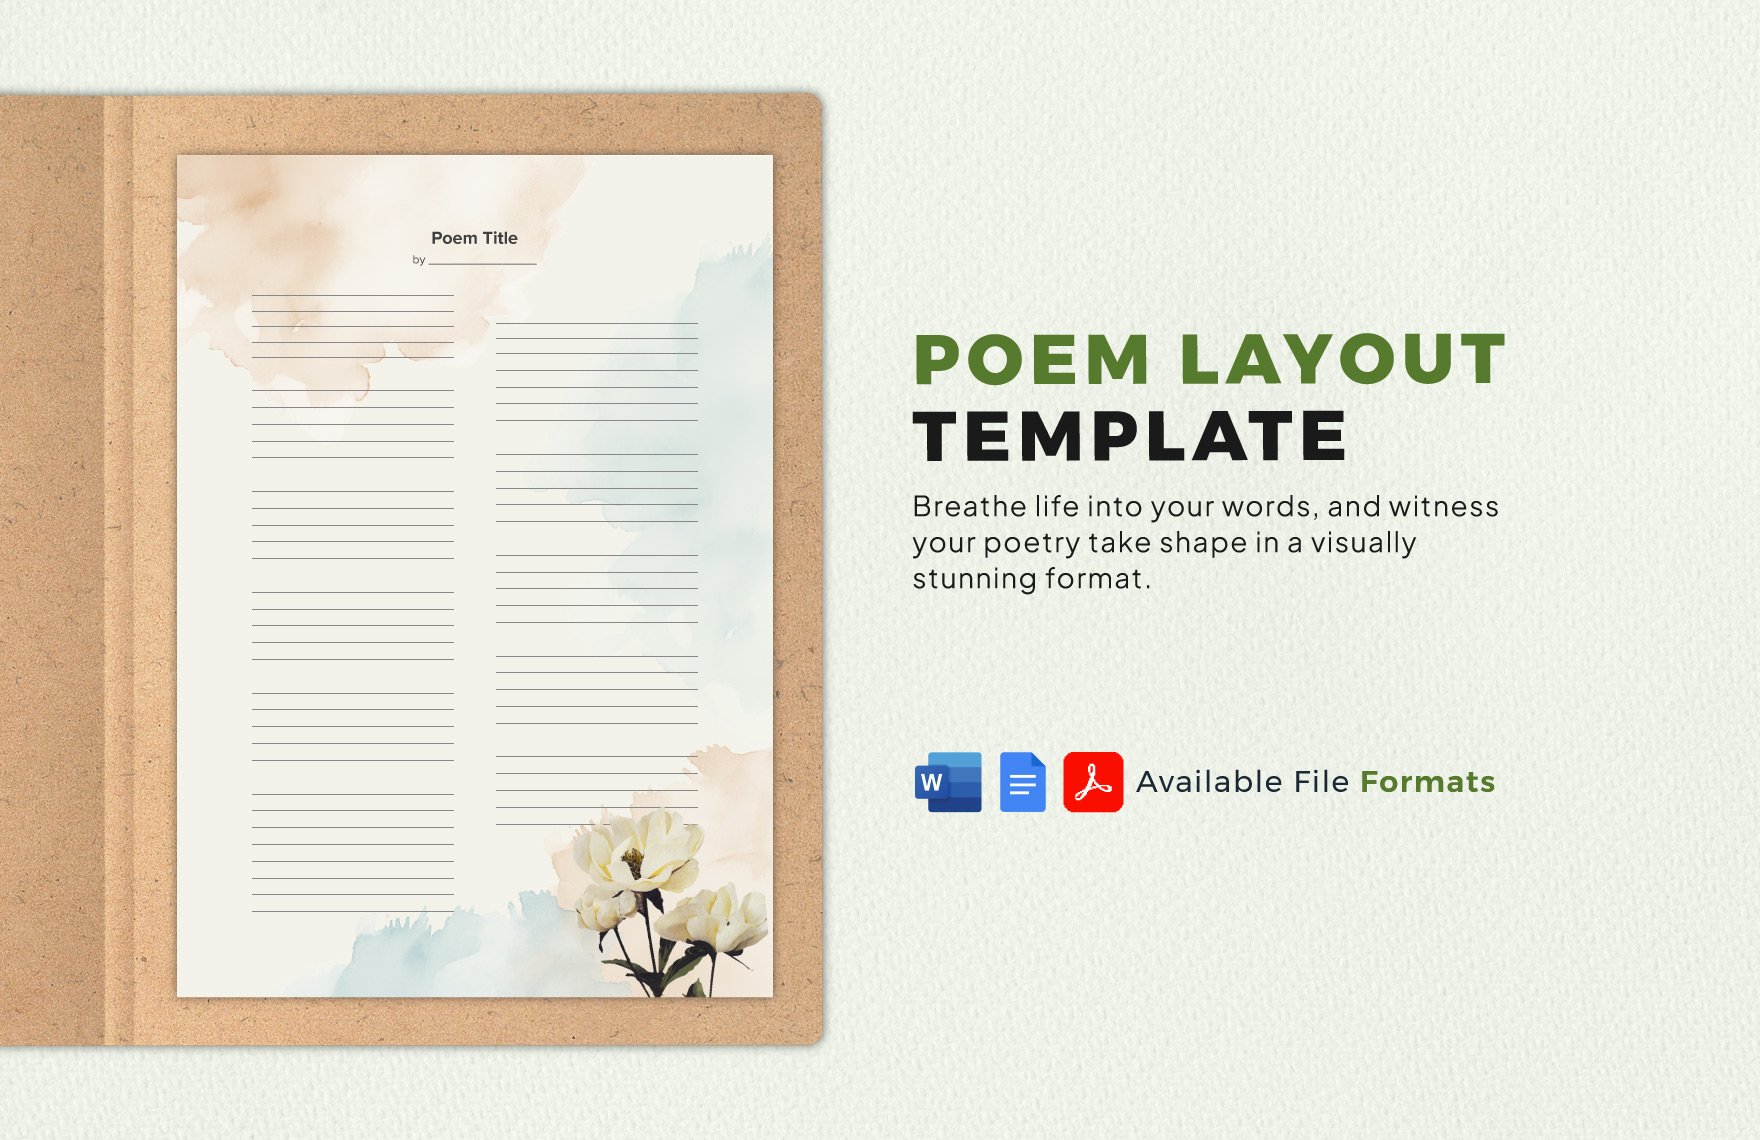 Free Poem Layout Template in Word, Google Docs, PDF